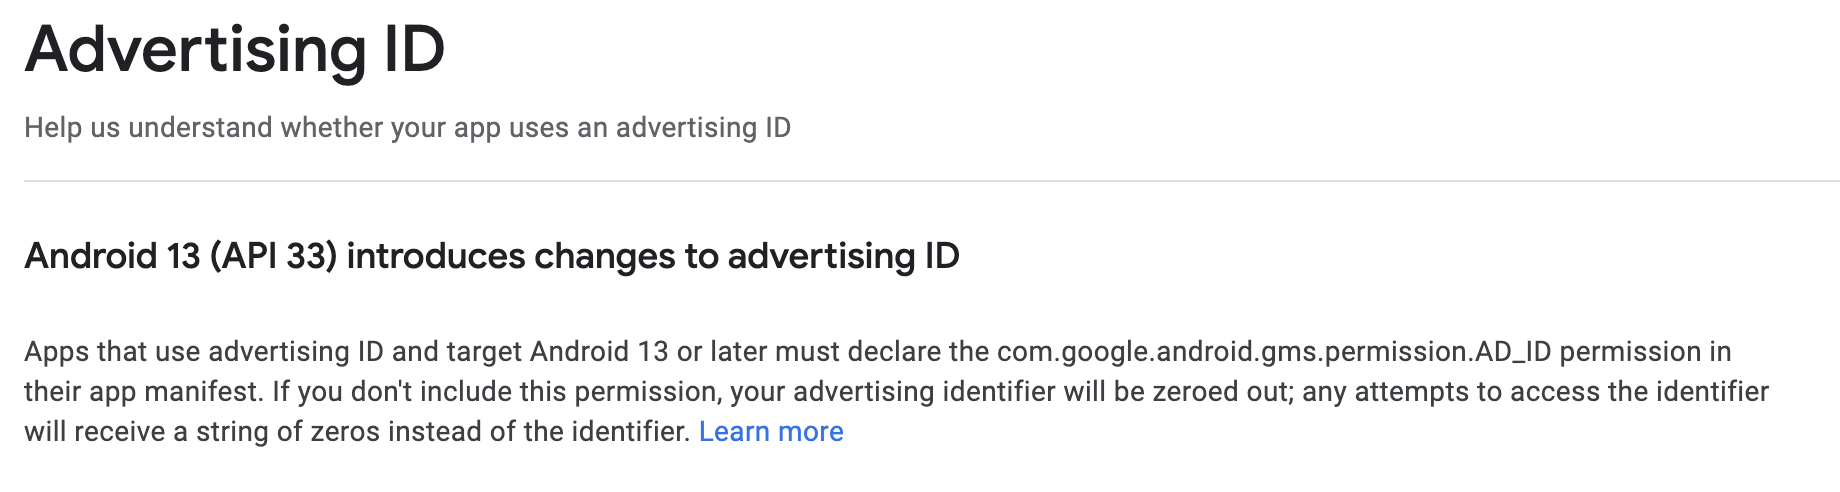 Advertising ID - Declaration for Android 13(API 33), when and how to submit it.